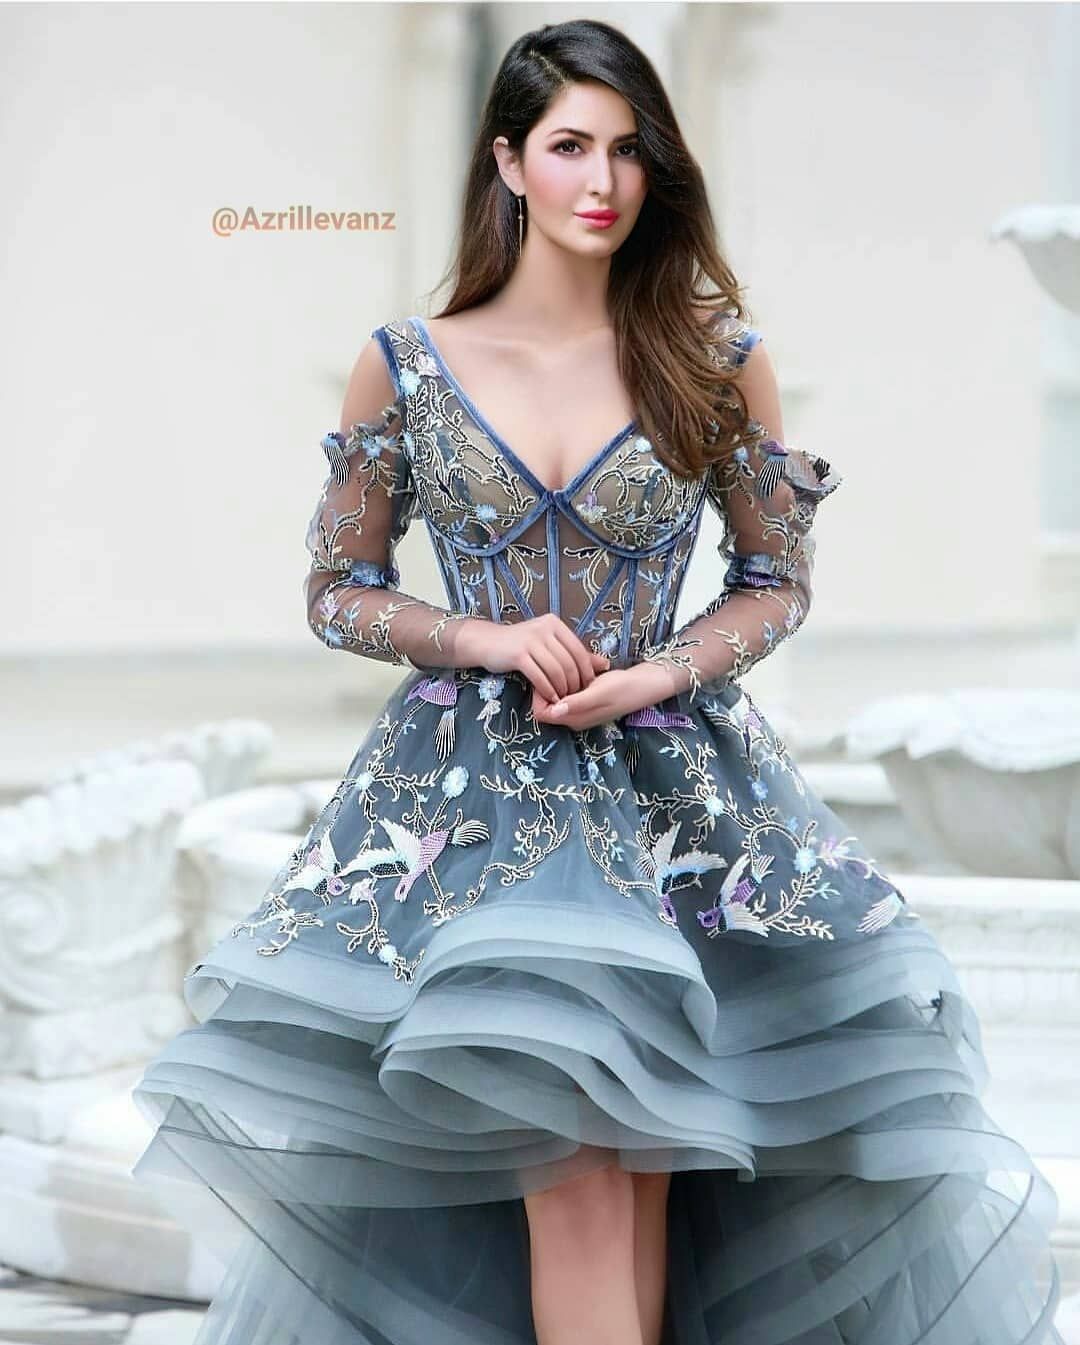 Queen in the word. Katrina kaif photo, Prom dresses long with sleeves, Beautiful dresses